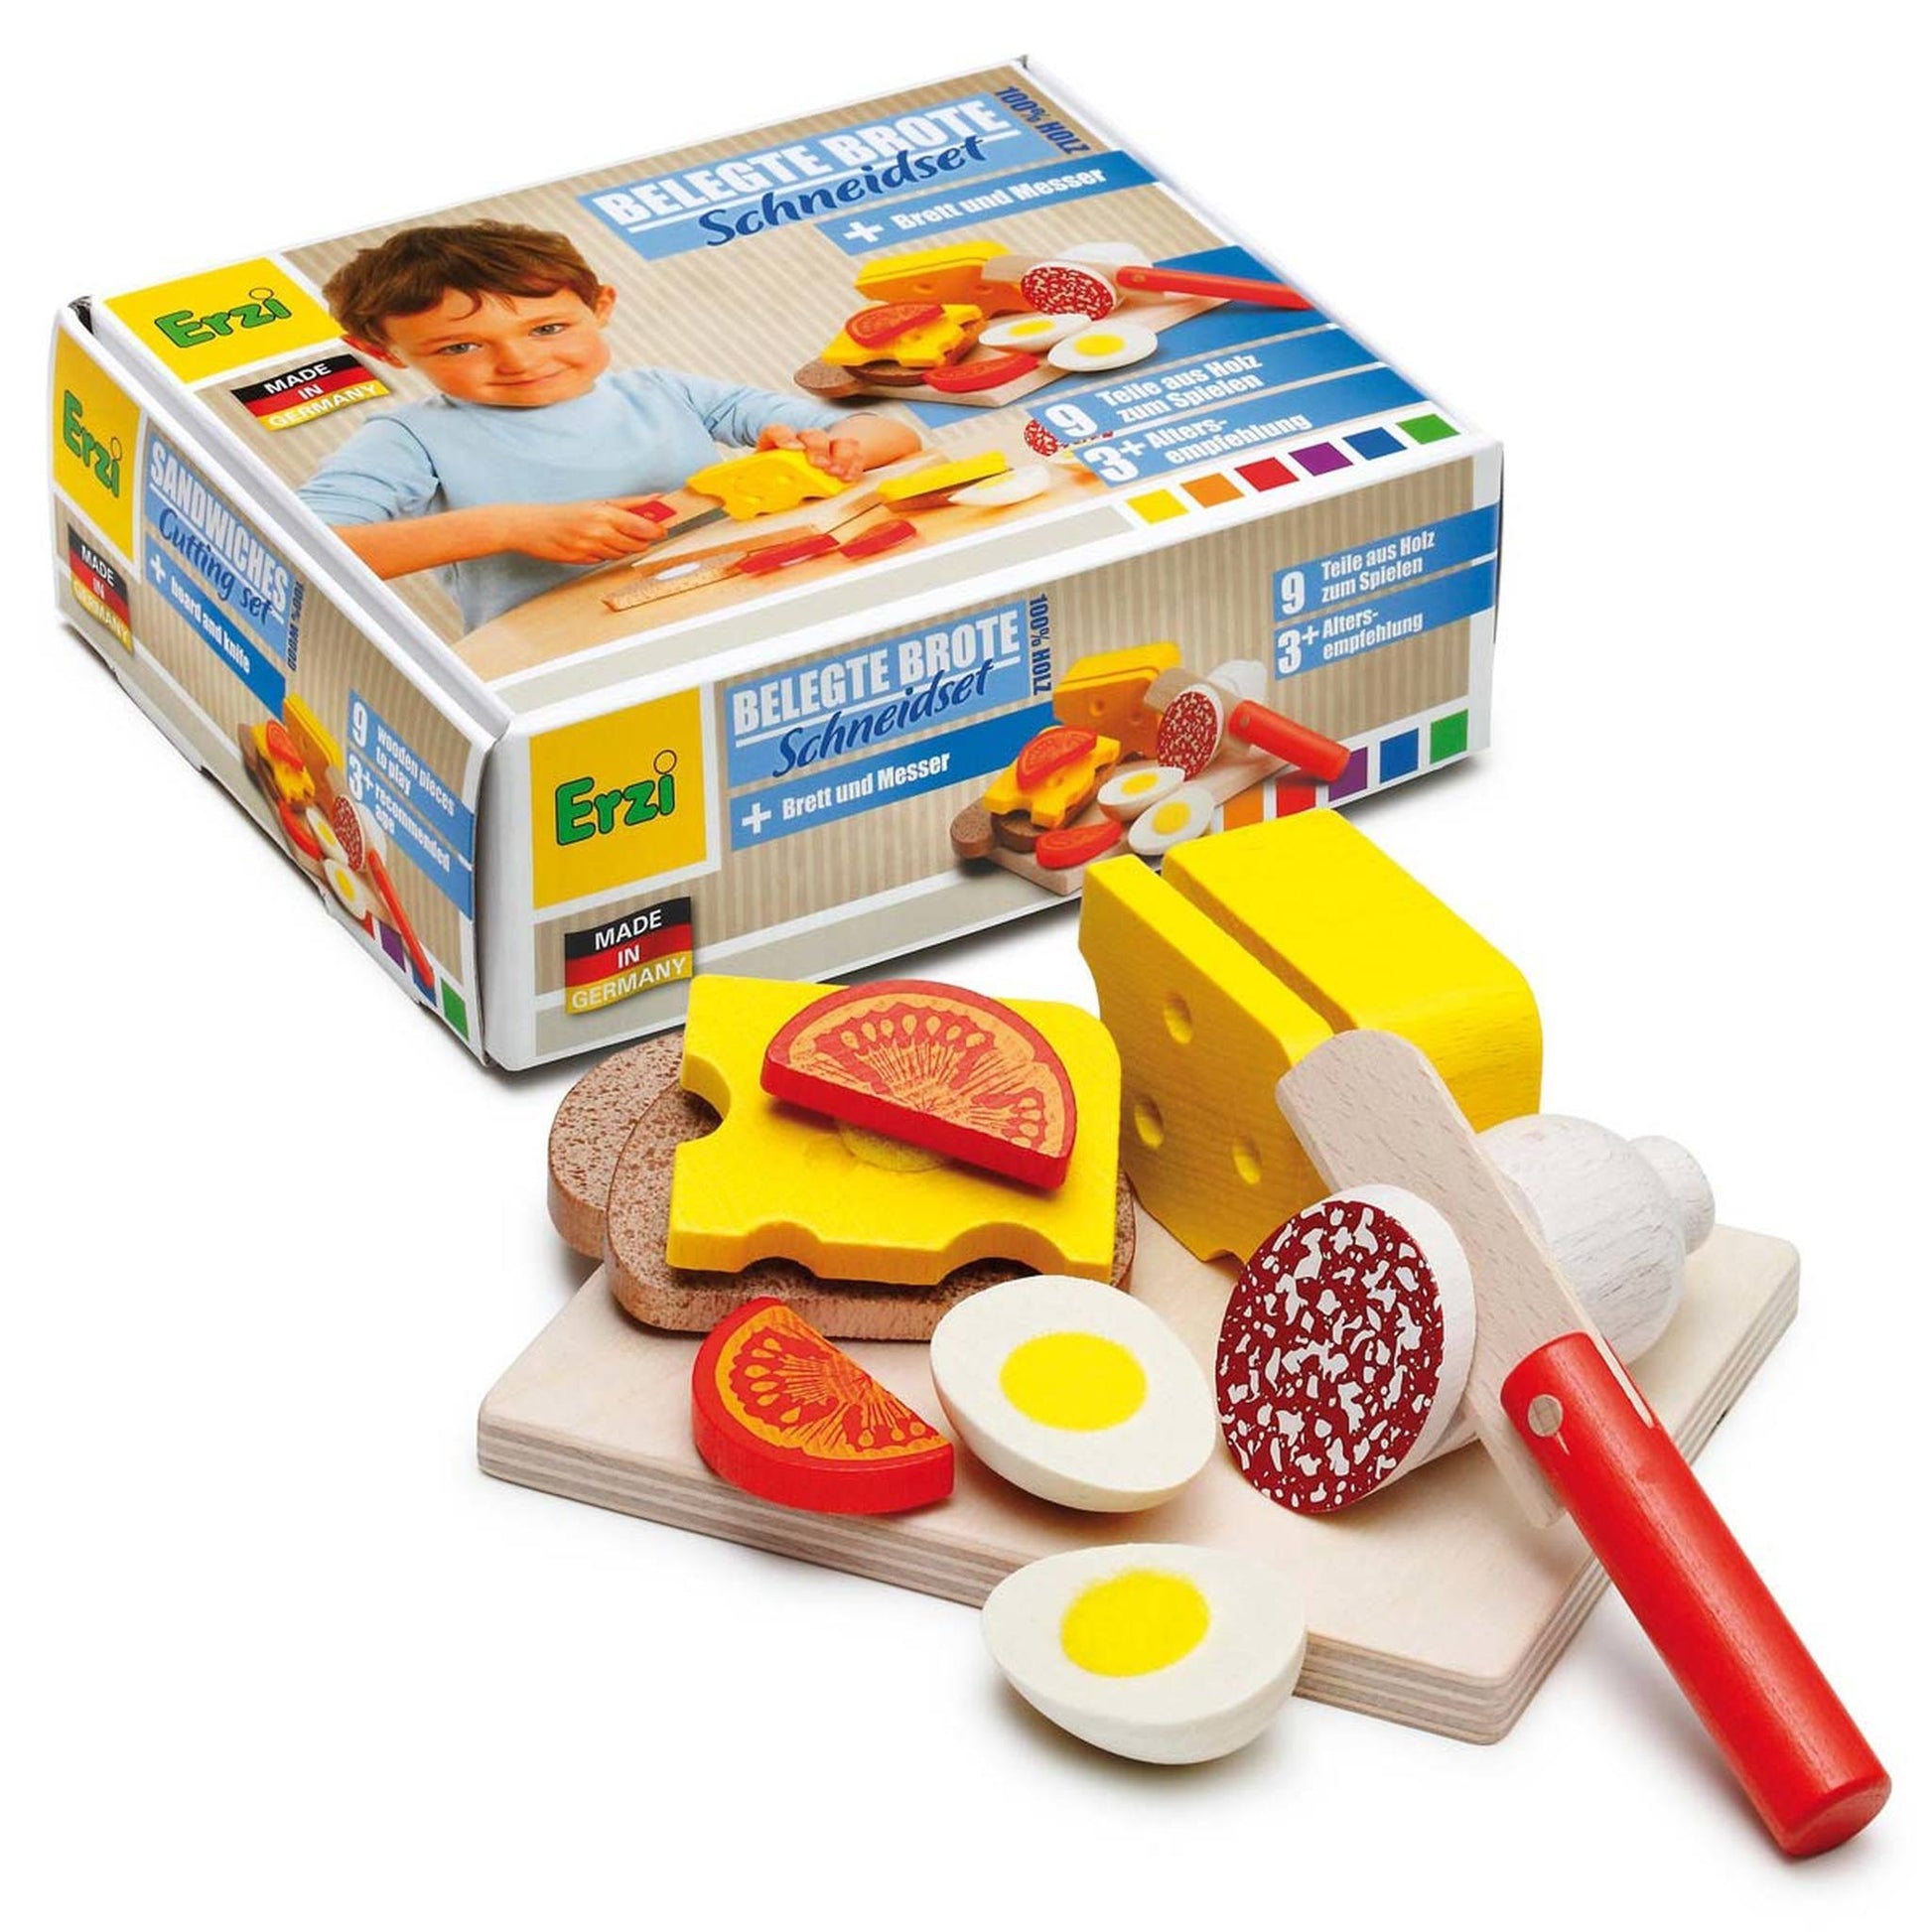 Erzi Sandwich Cutting Set - Play Food Made in Germany - Wood Wood Toys Canada's Favourite Montessori Toy Store